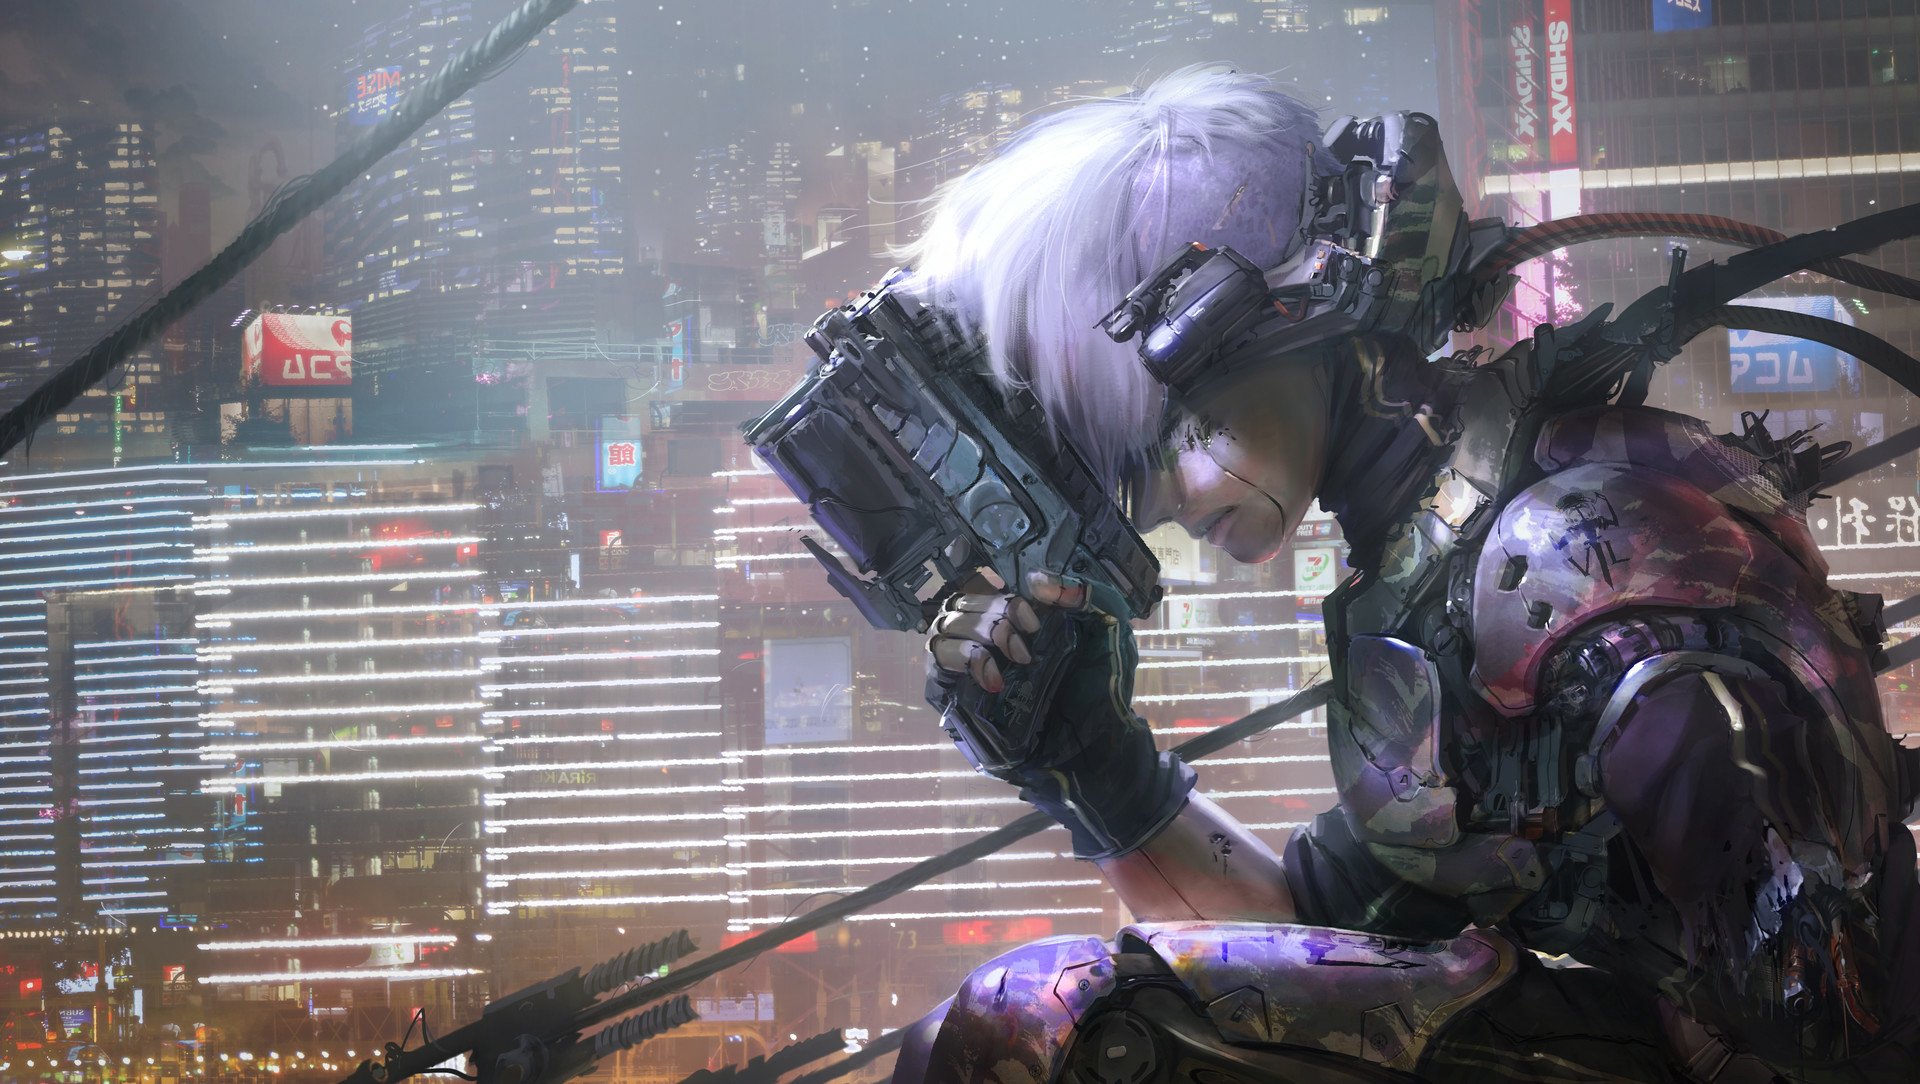 440+ Sci Fi Cyberpunk HD Wallpapers and Backgrounds